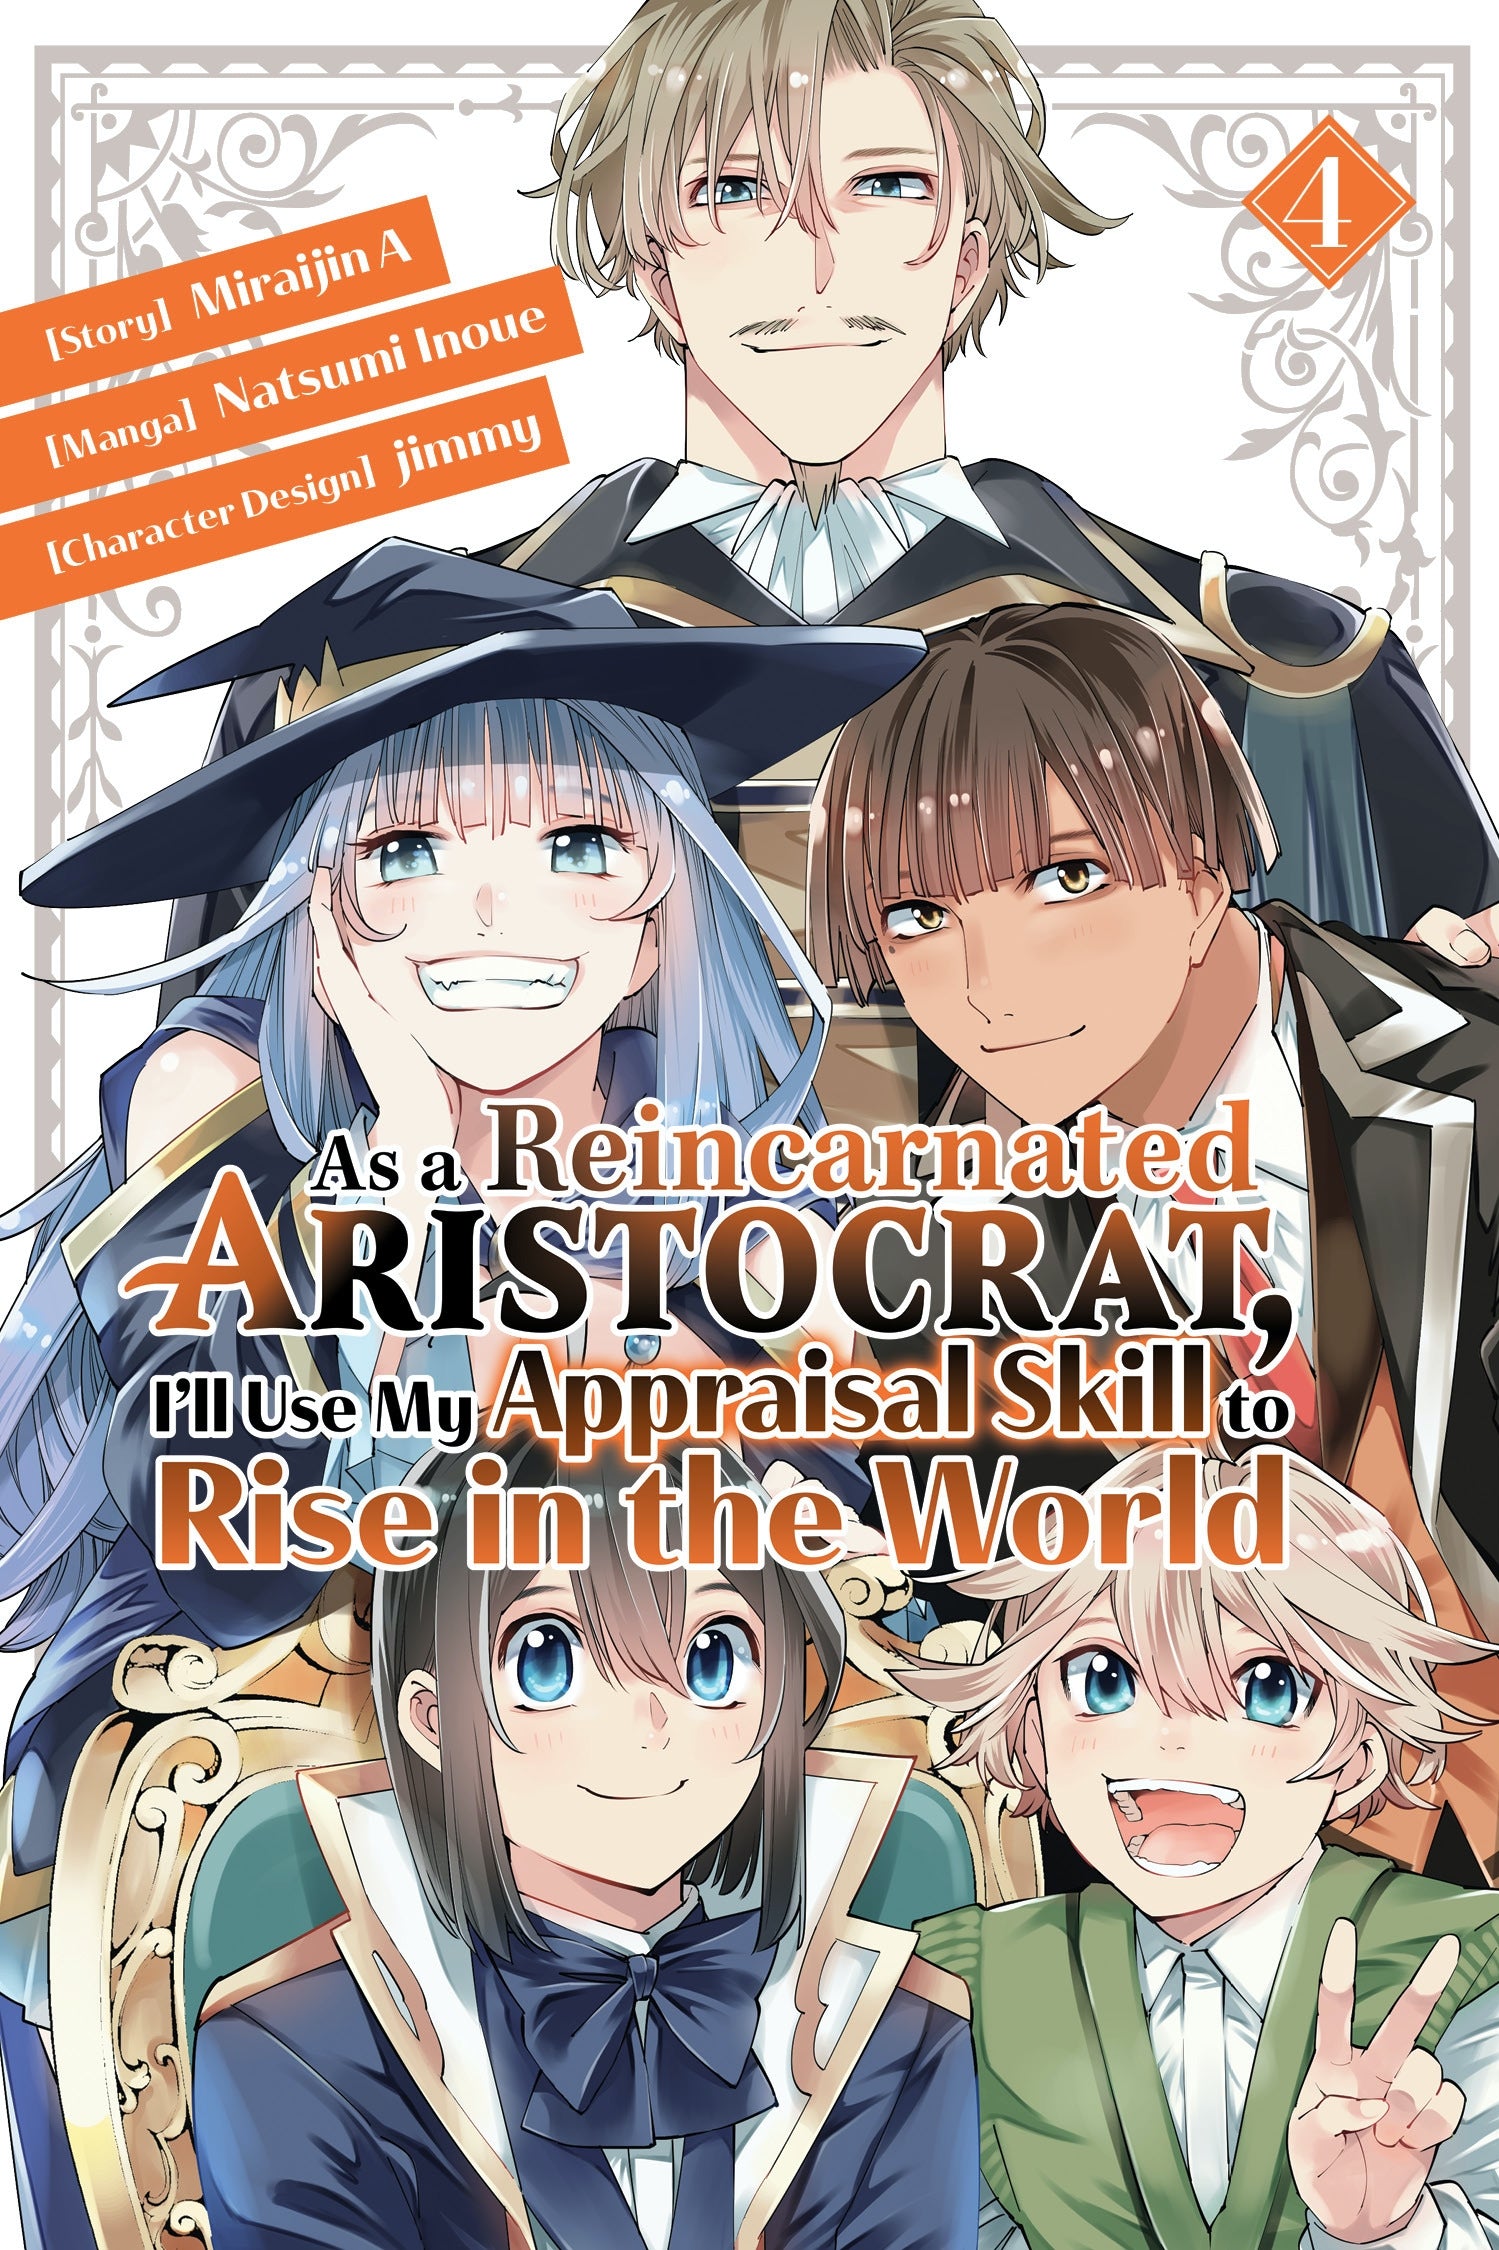 As a Reincarnated Aristocrat, I'll Use My Appraisal Skill to Rise in the World - Vol. 4 (Manga)